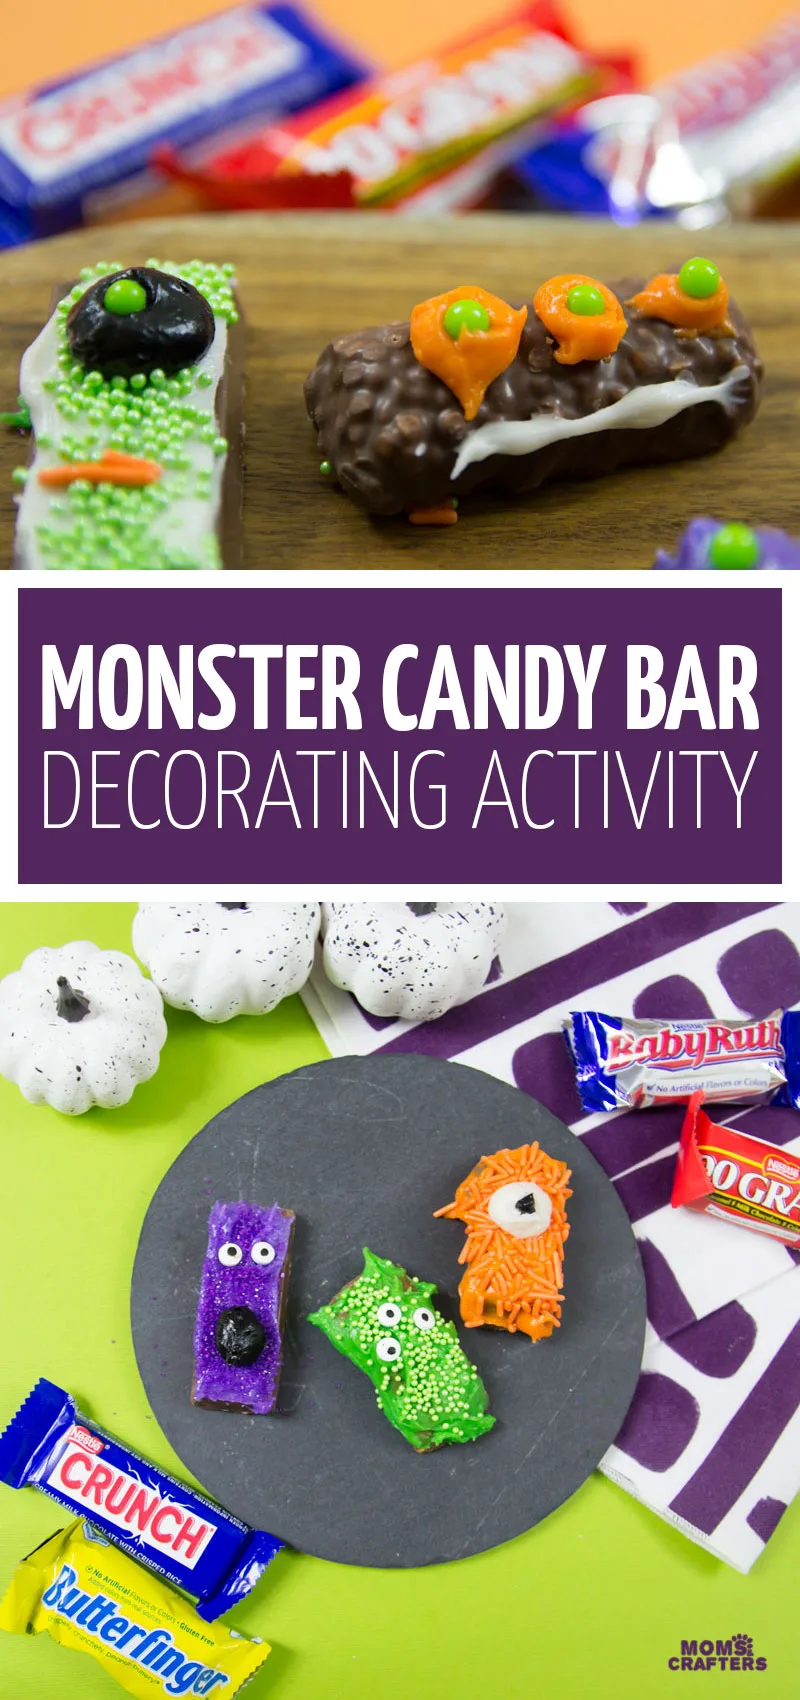 Click for a super fun monster candy bar decorating activity, a fun recipe using Butterfinger chocolate and more! This open-ended cooking with kids activity is fun for Halloween or a monster birthday party. 